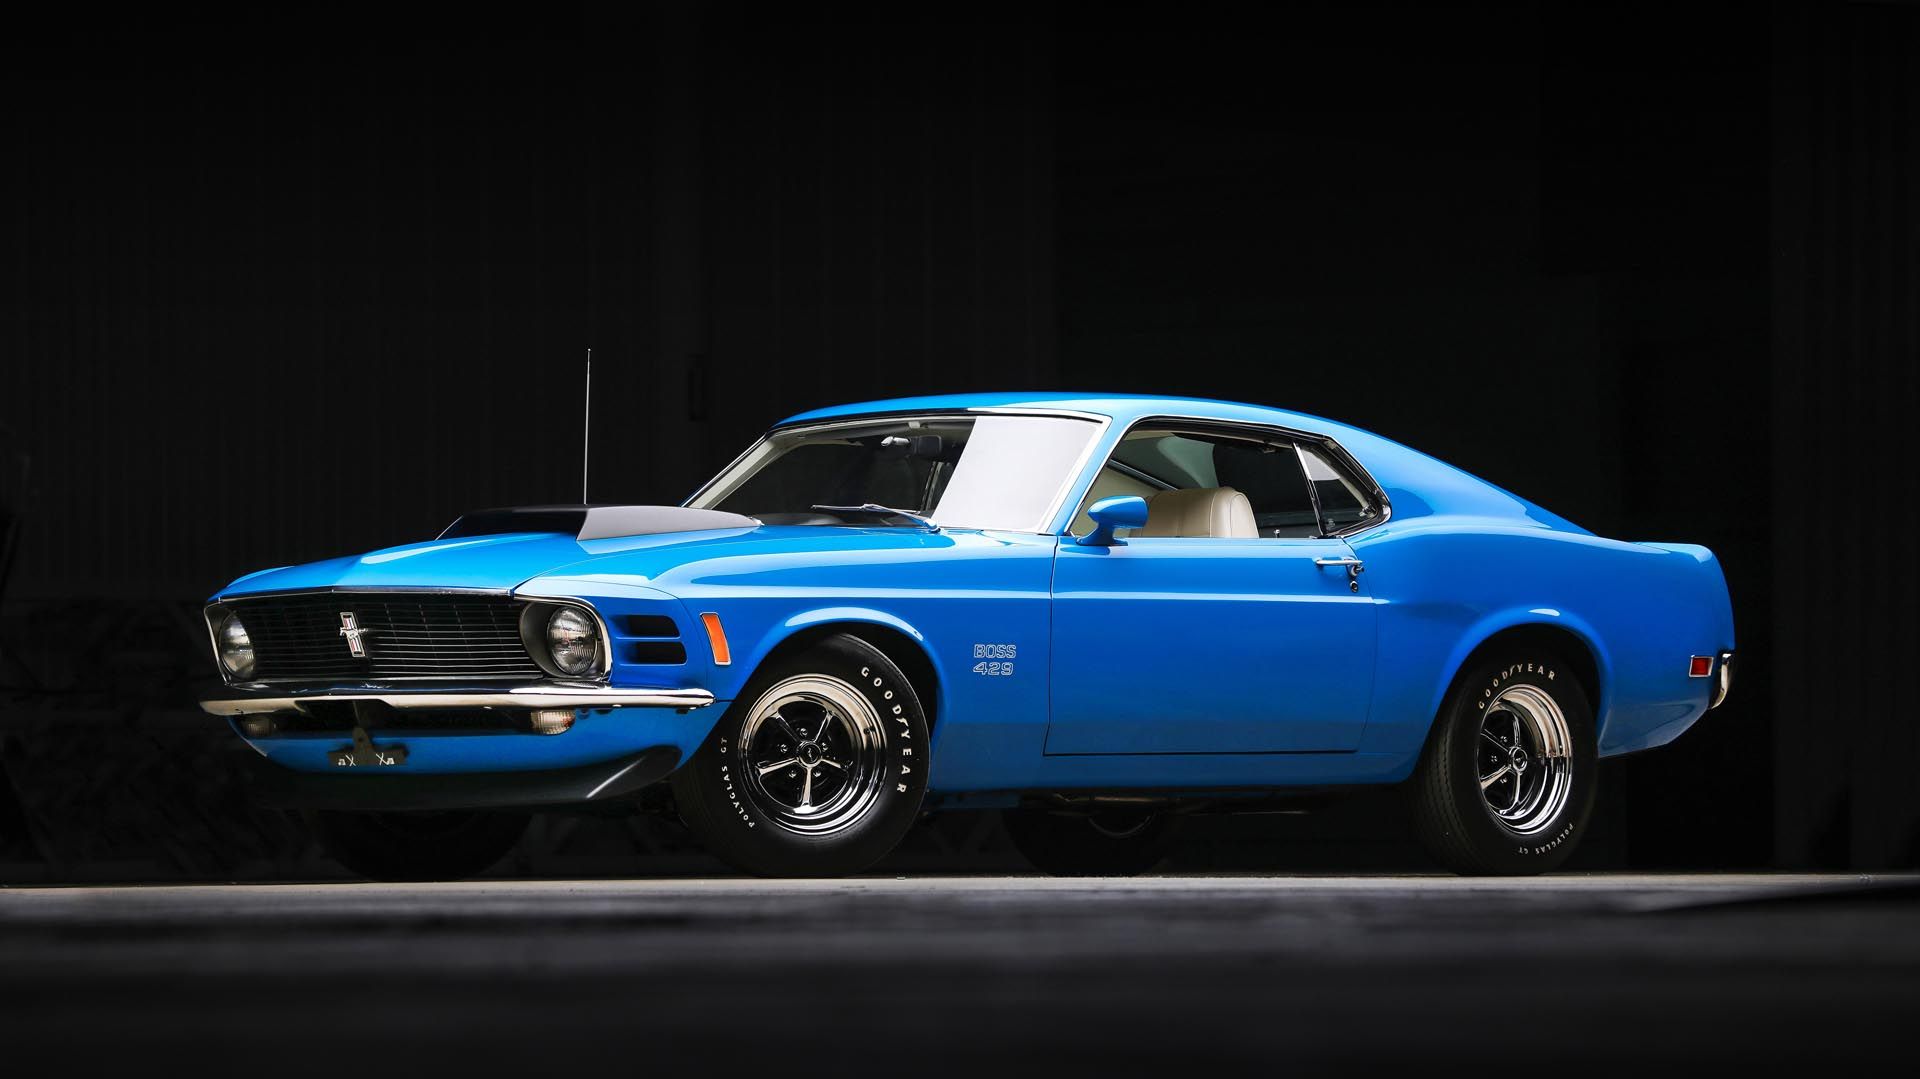  Ford Mustang Boss 429